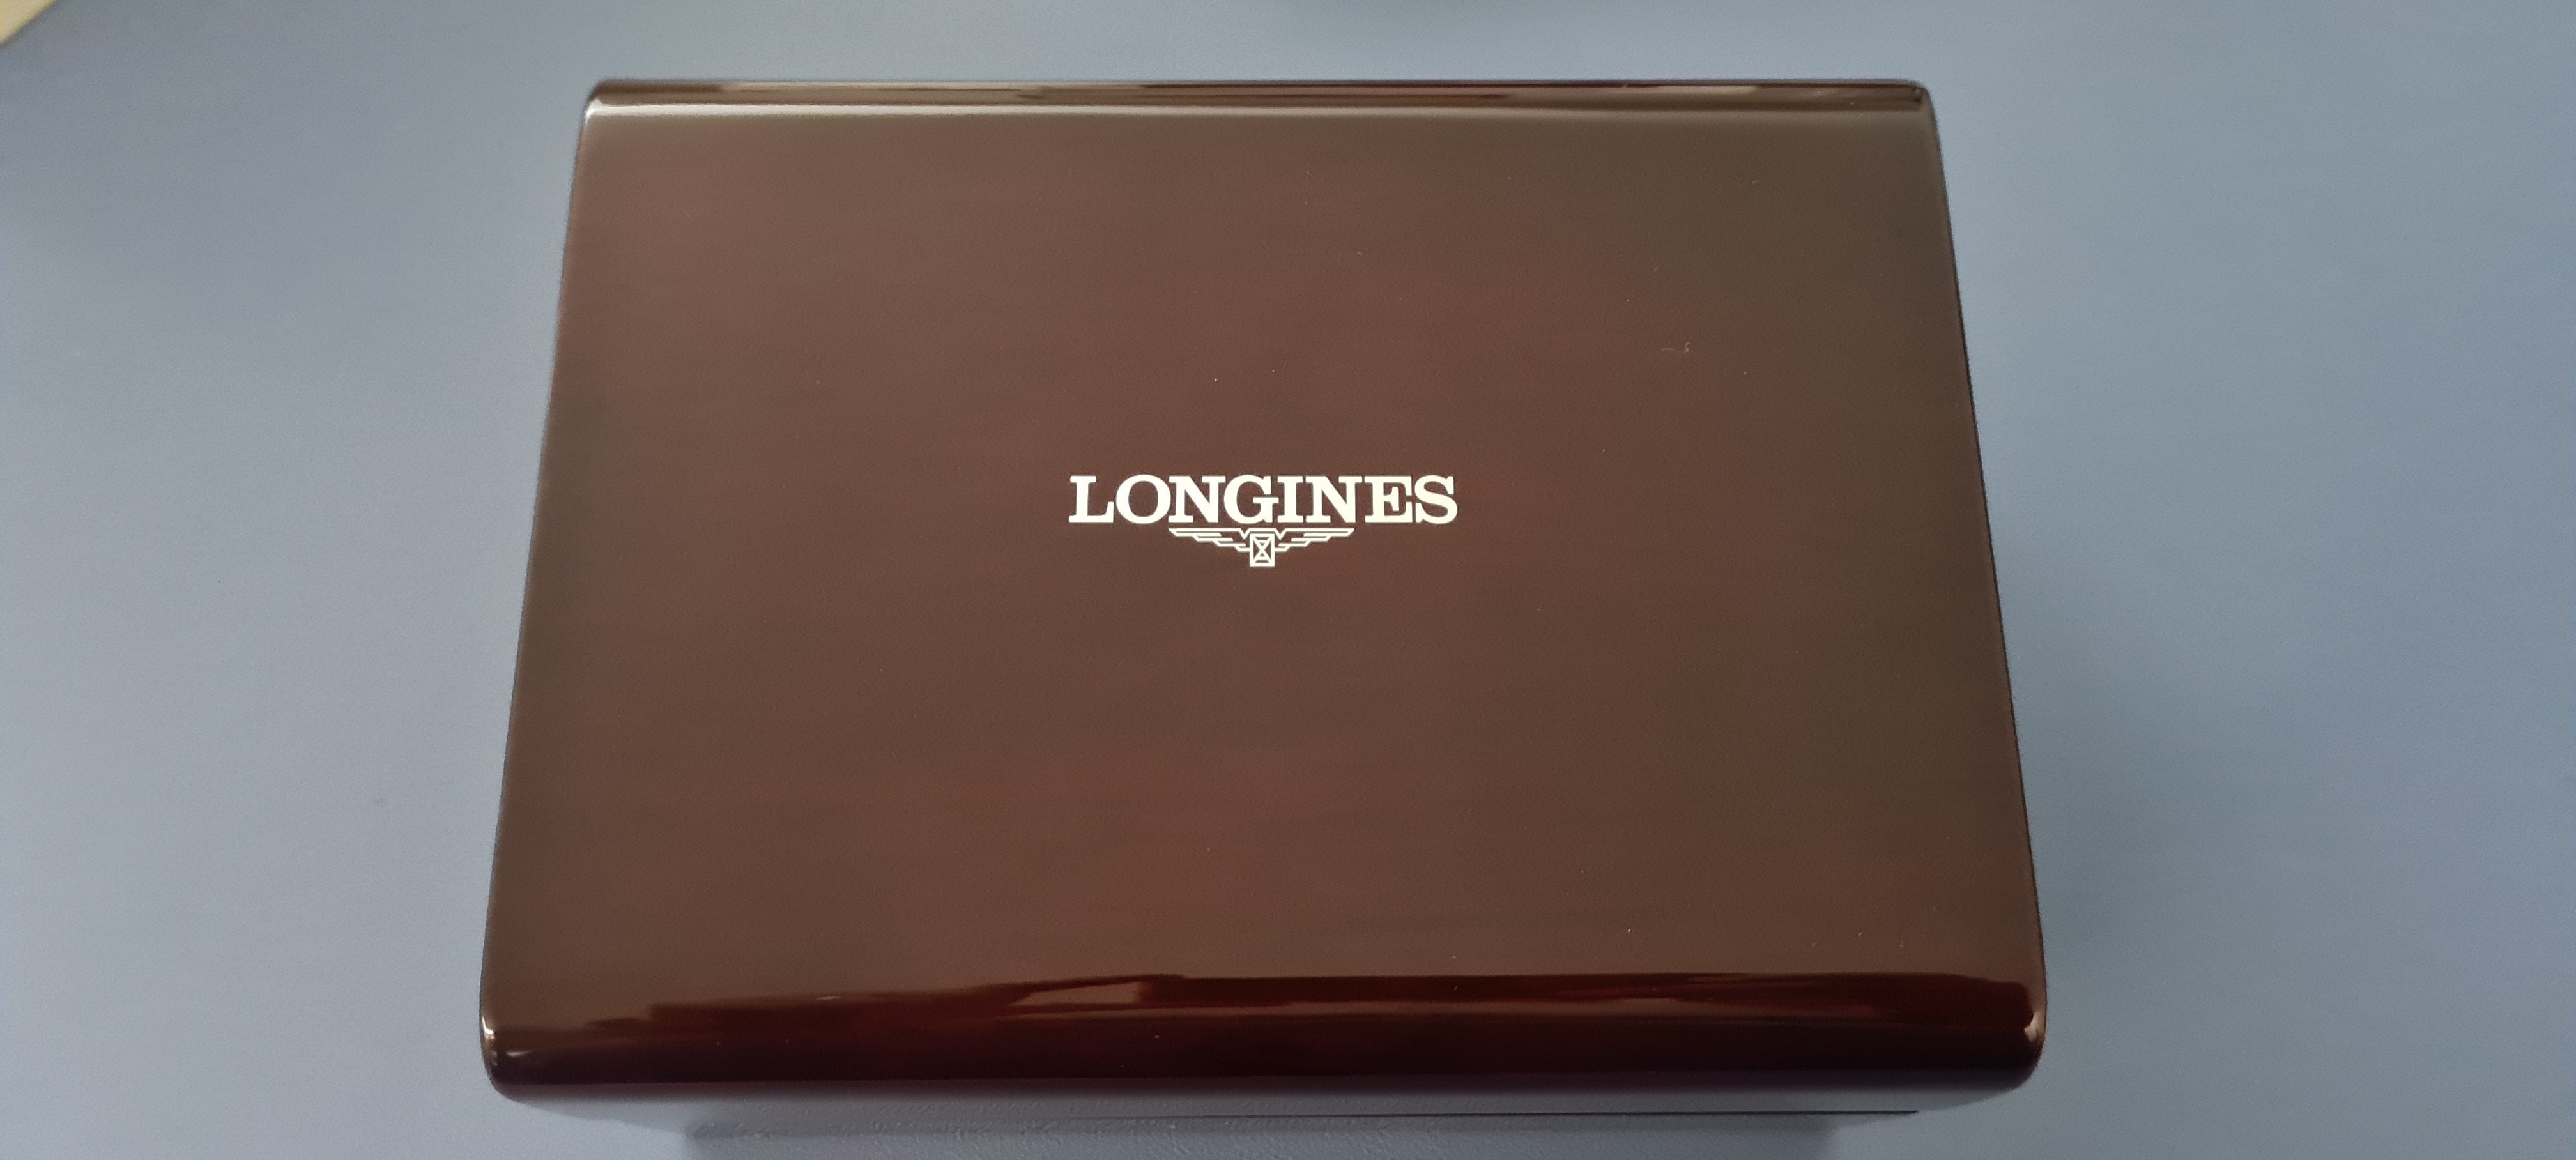 Longines Master Collection | Longines Divers Watch | Harley's Time LLC